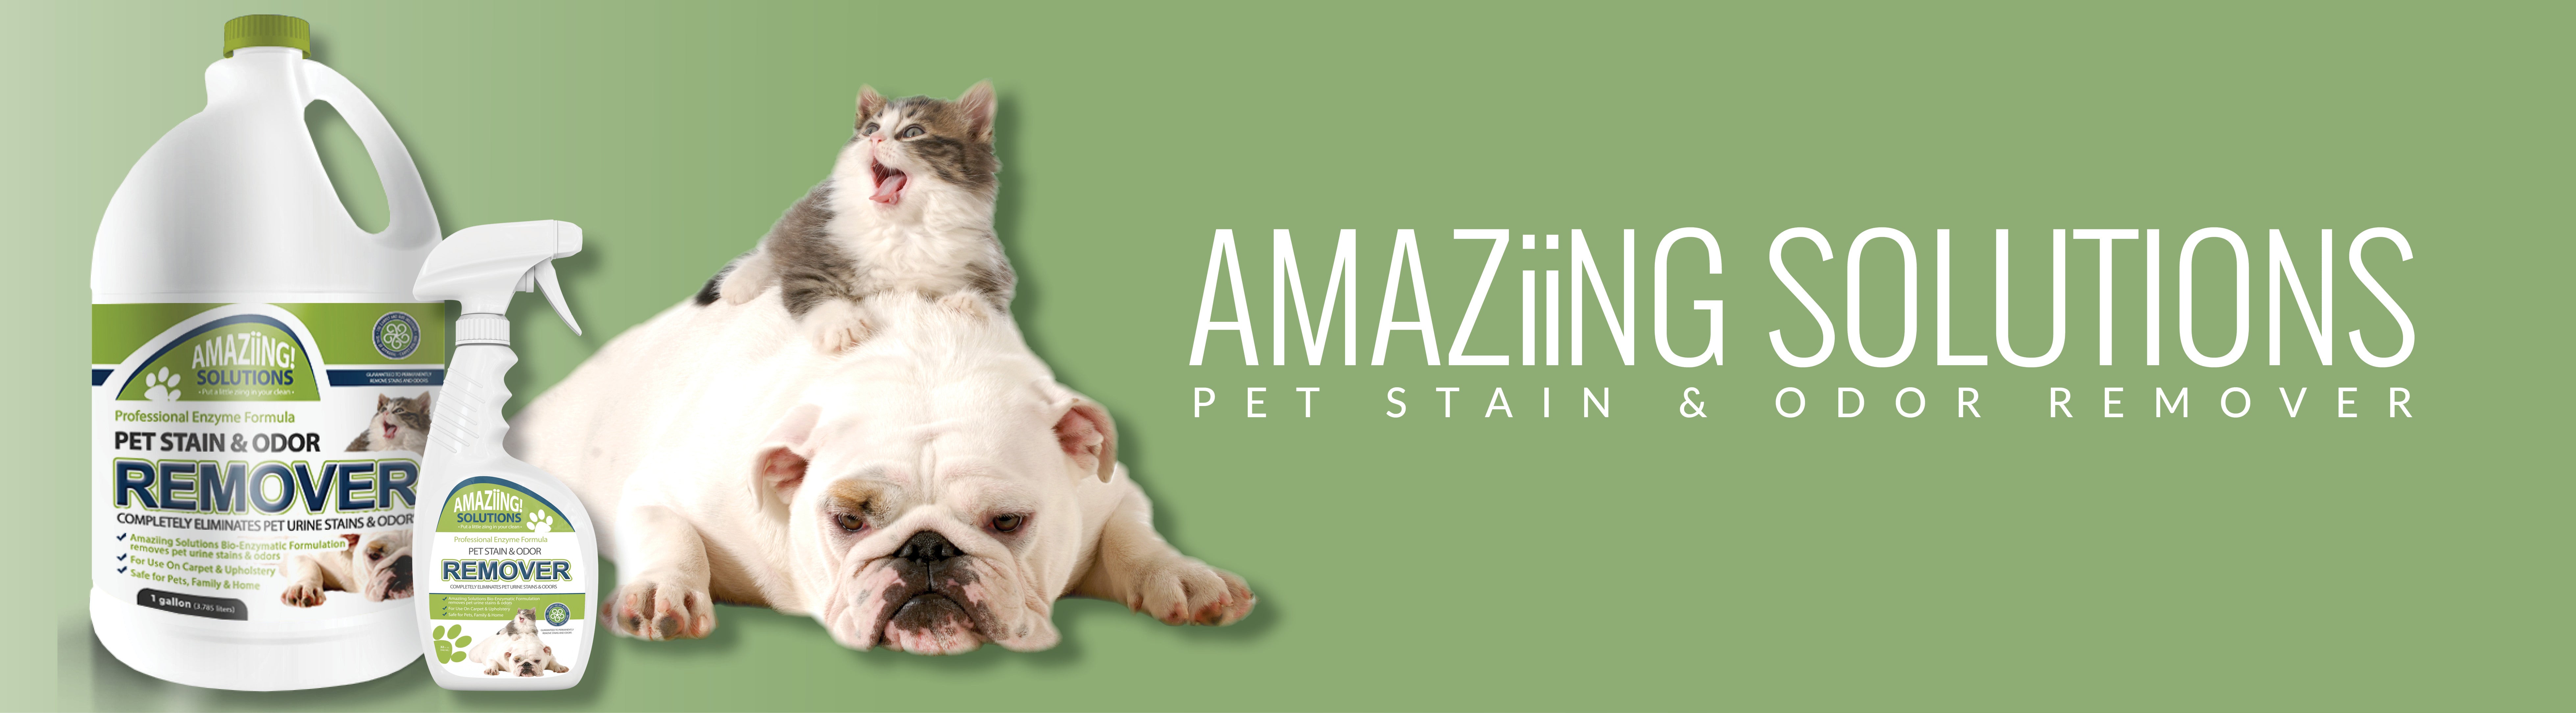 Amaziing Solutions Pet Stain & Odor Remover